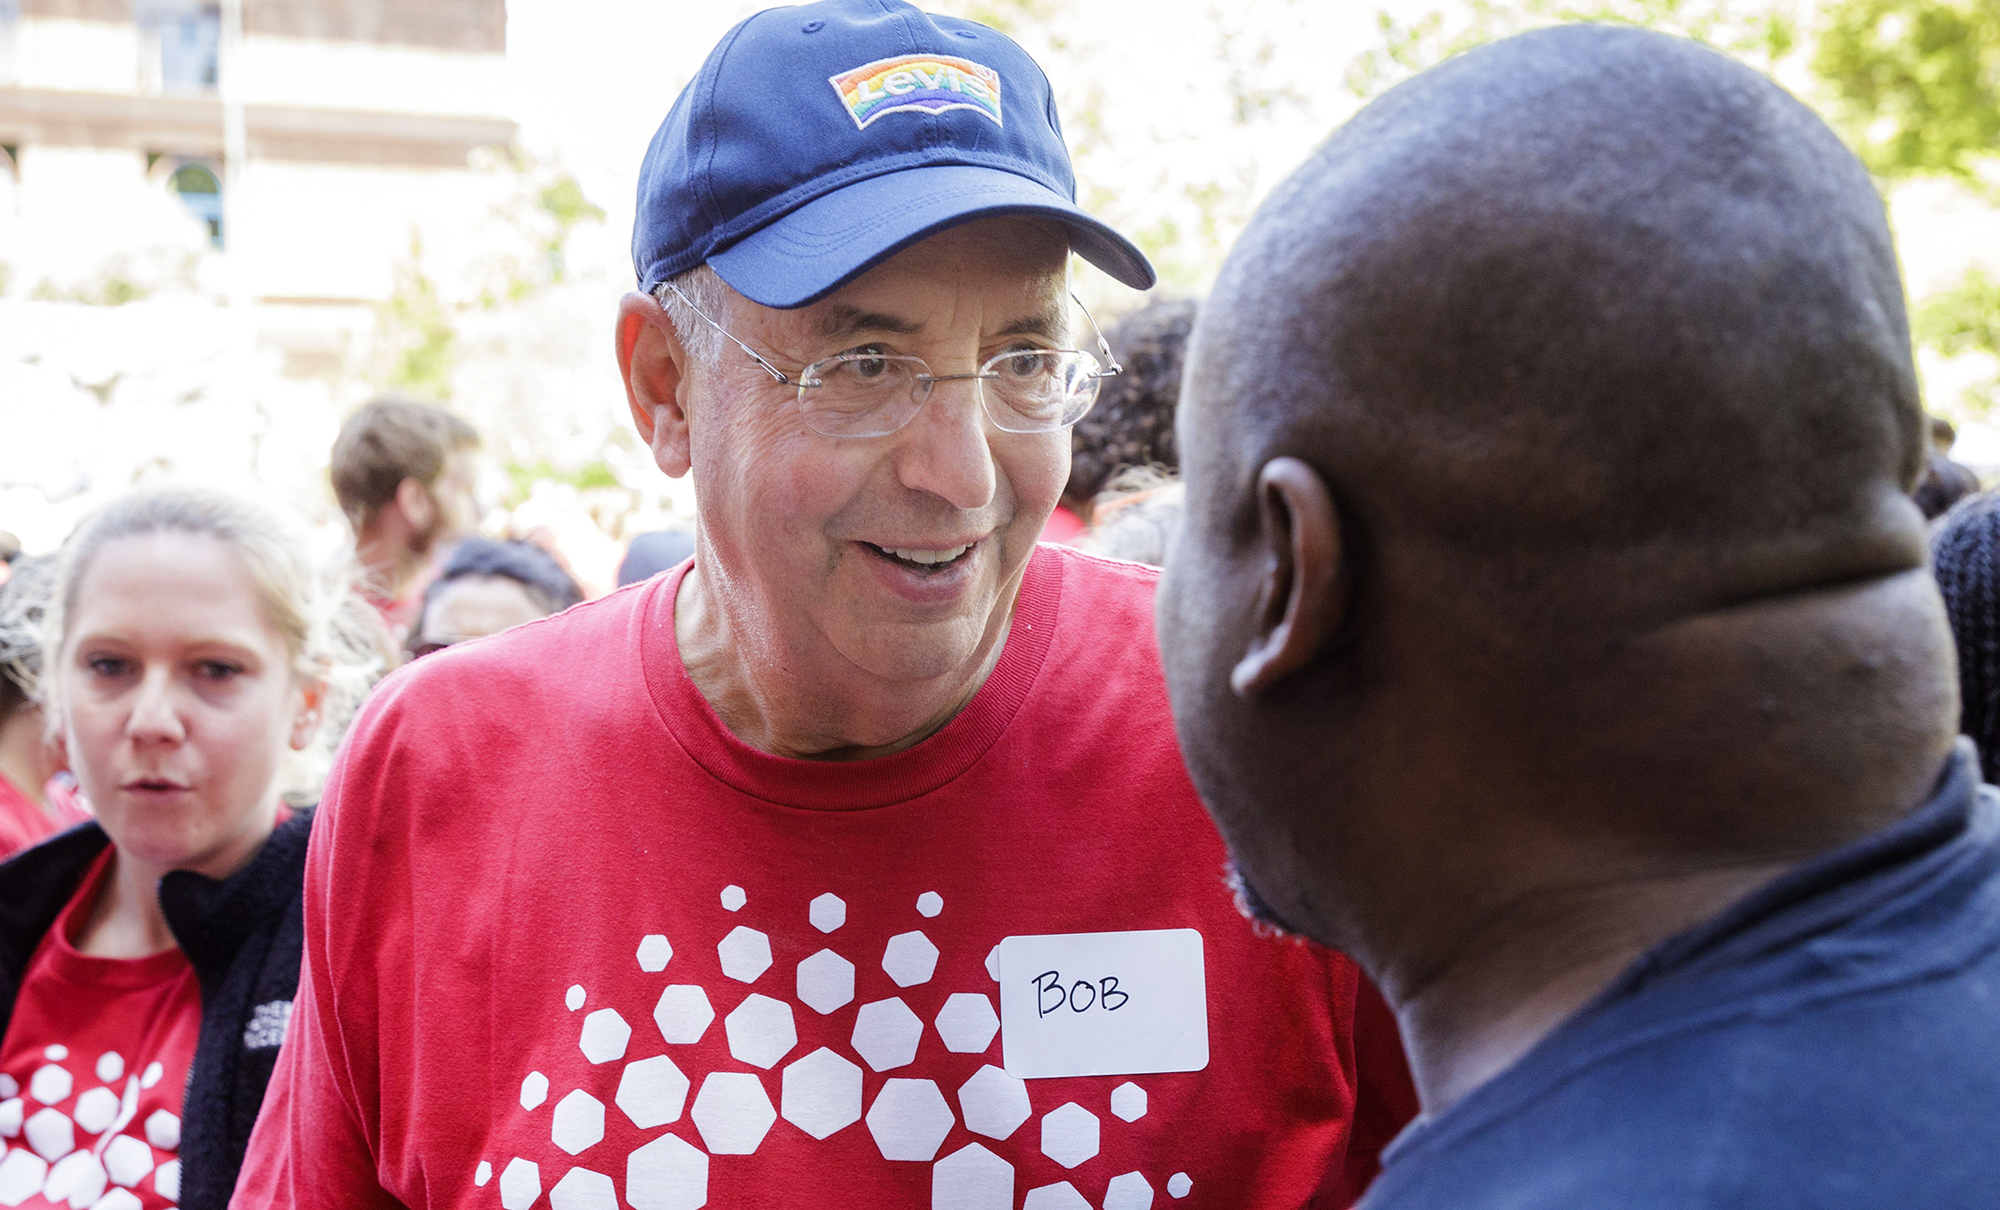 Levi Strauss & Co.'s Bob Haas Honored by SF Pride - Levi Strauss & Co : Levi  Strauss & Co